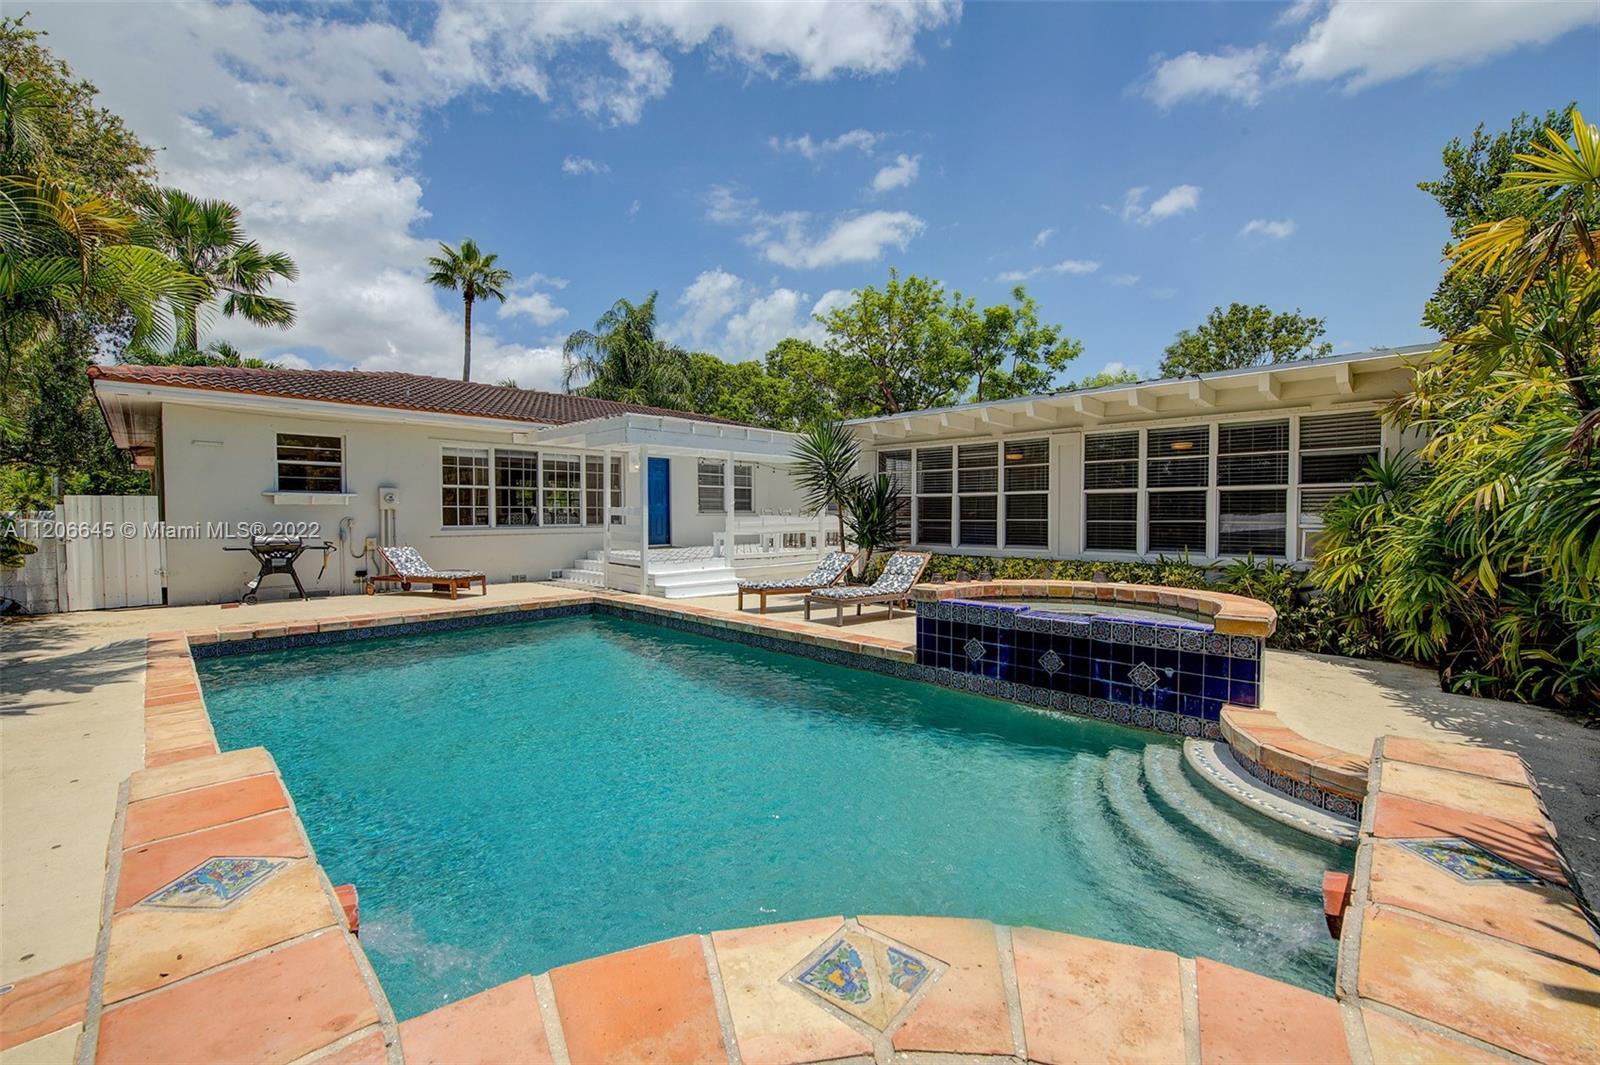 Very Bright and welcoming five bedroom pool home on a gorgeous tucked away street in Miami Shores. N